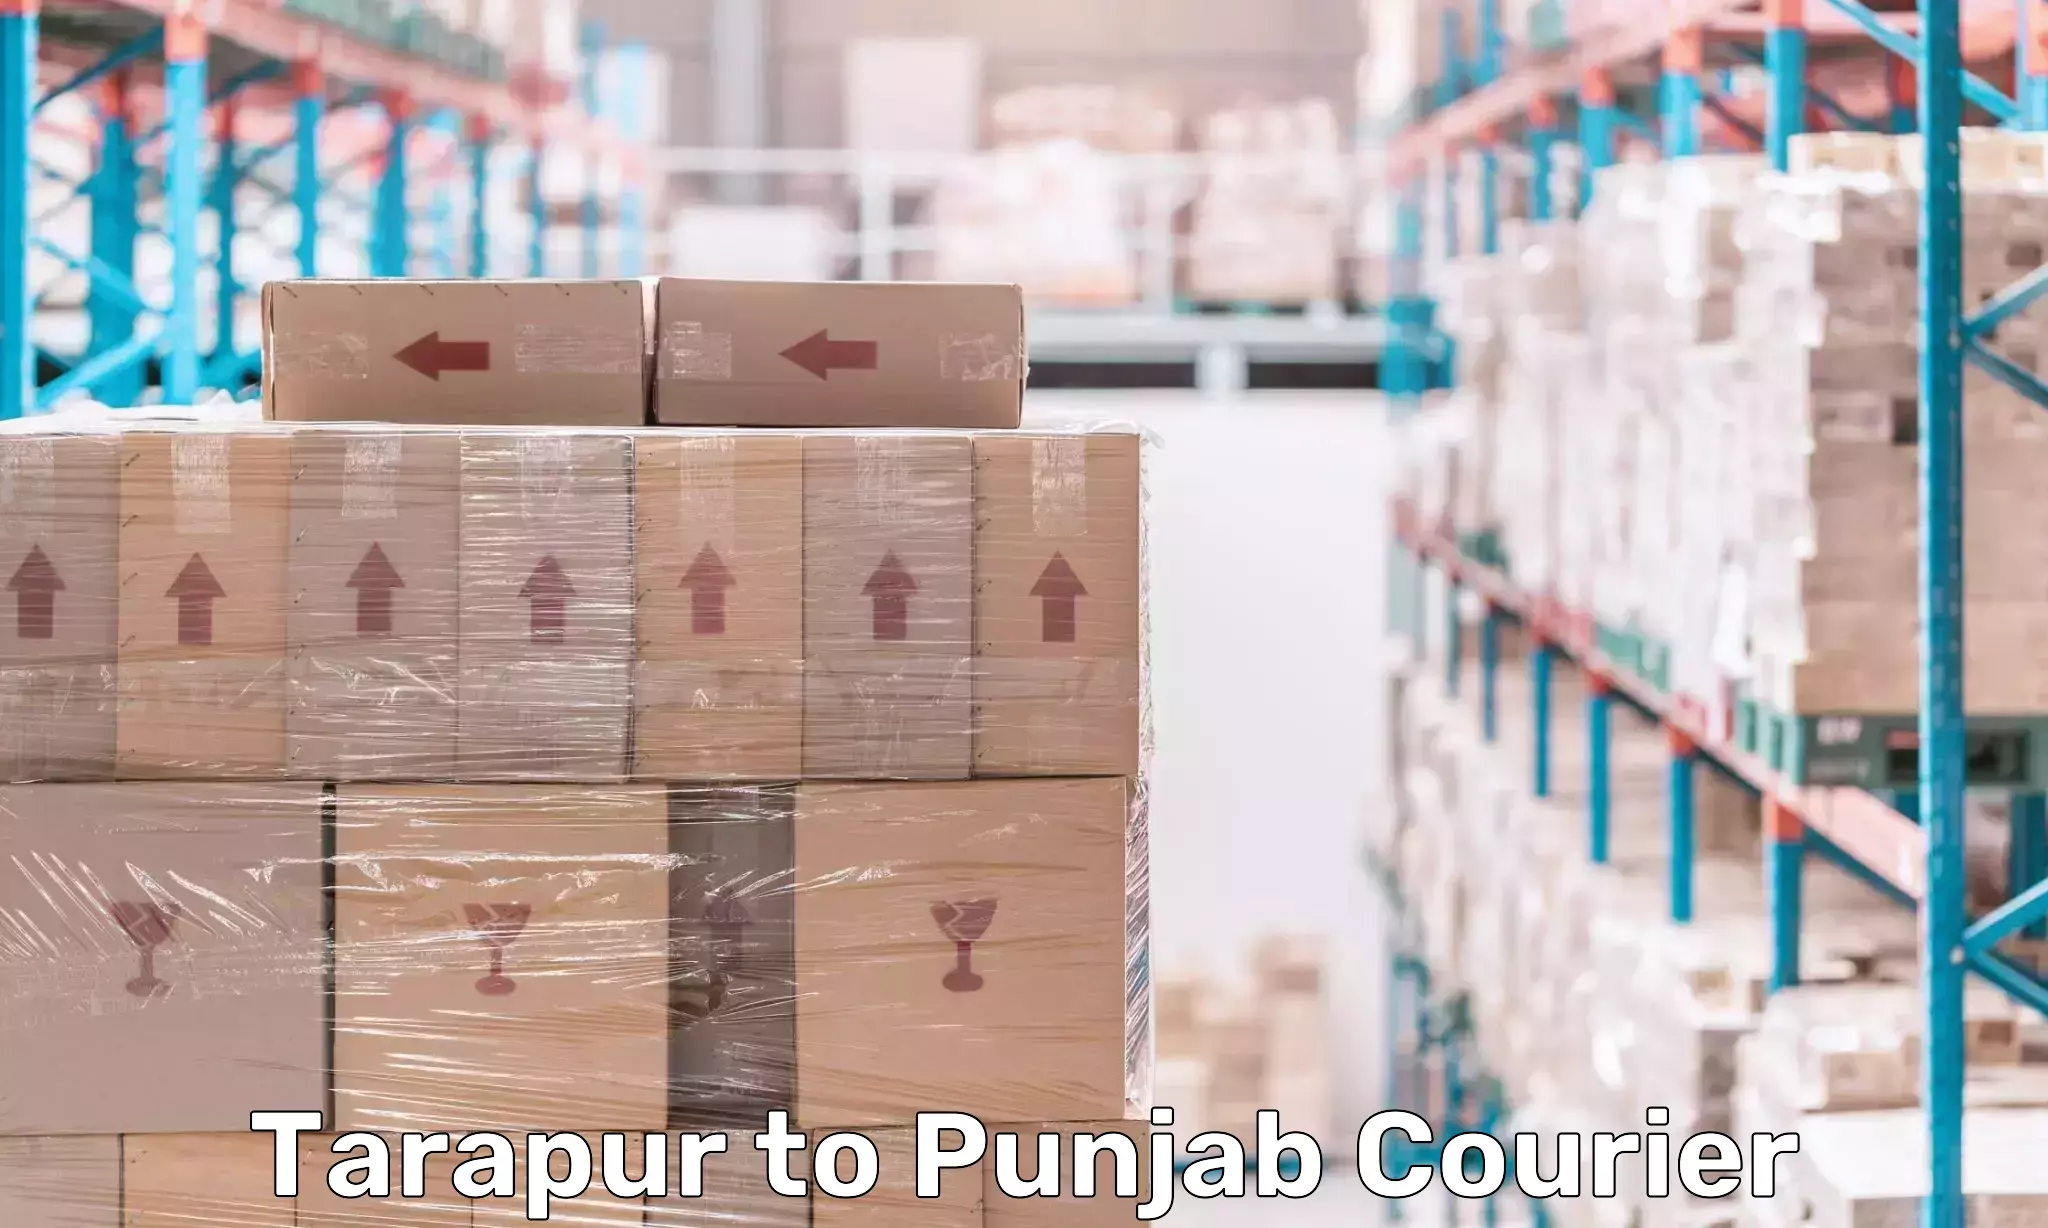 Residential courier service Tarapur to Punjab